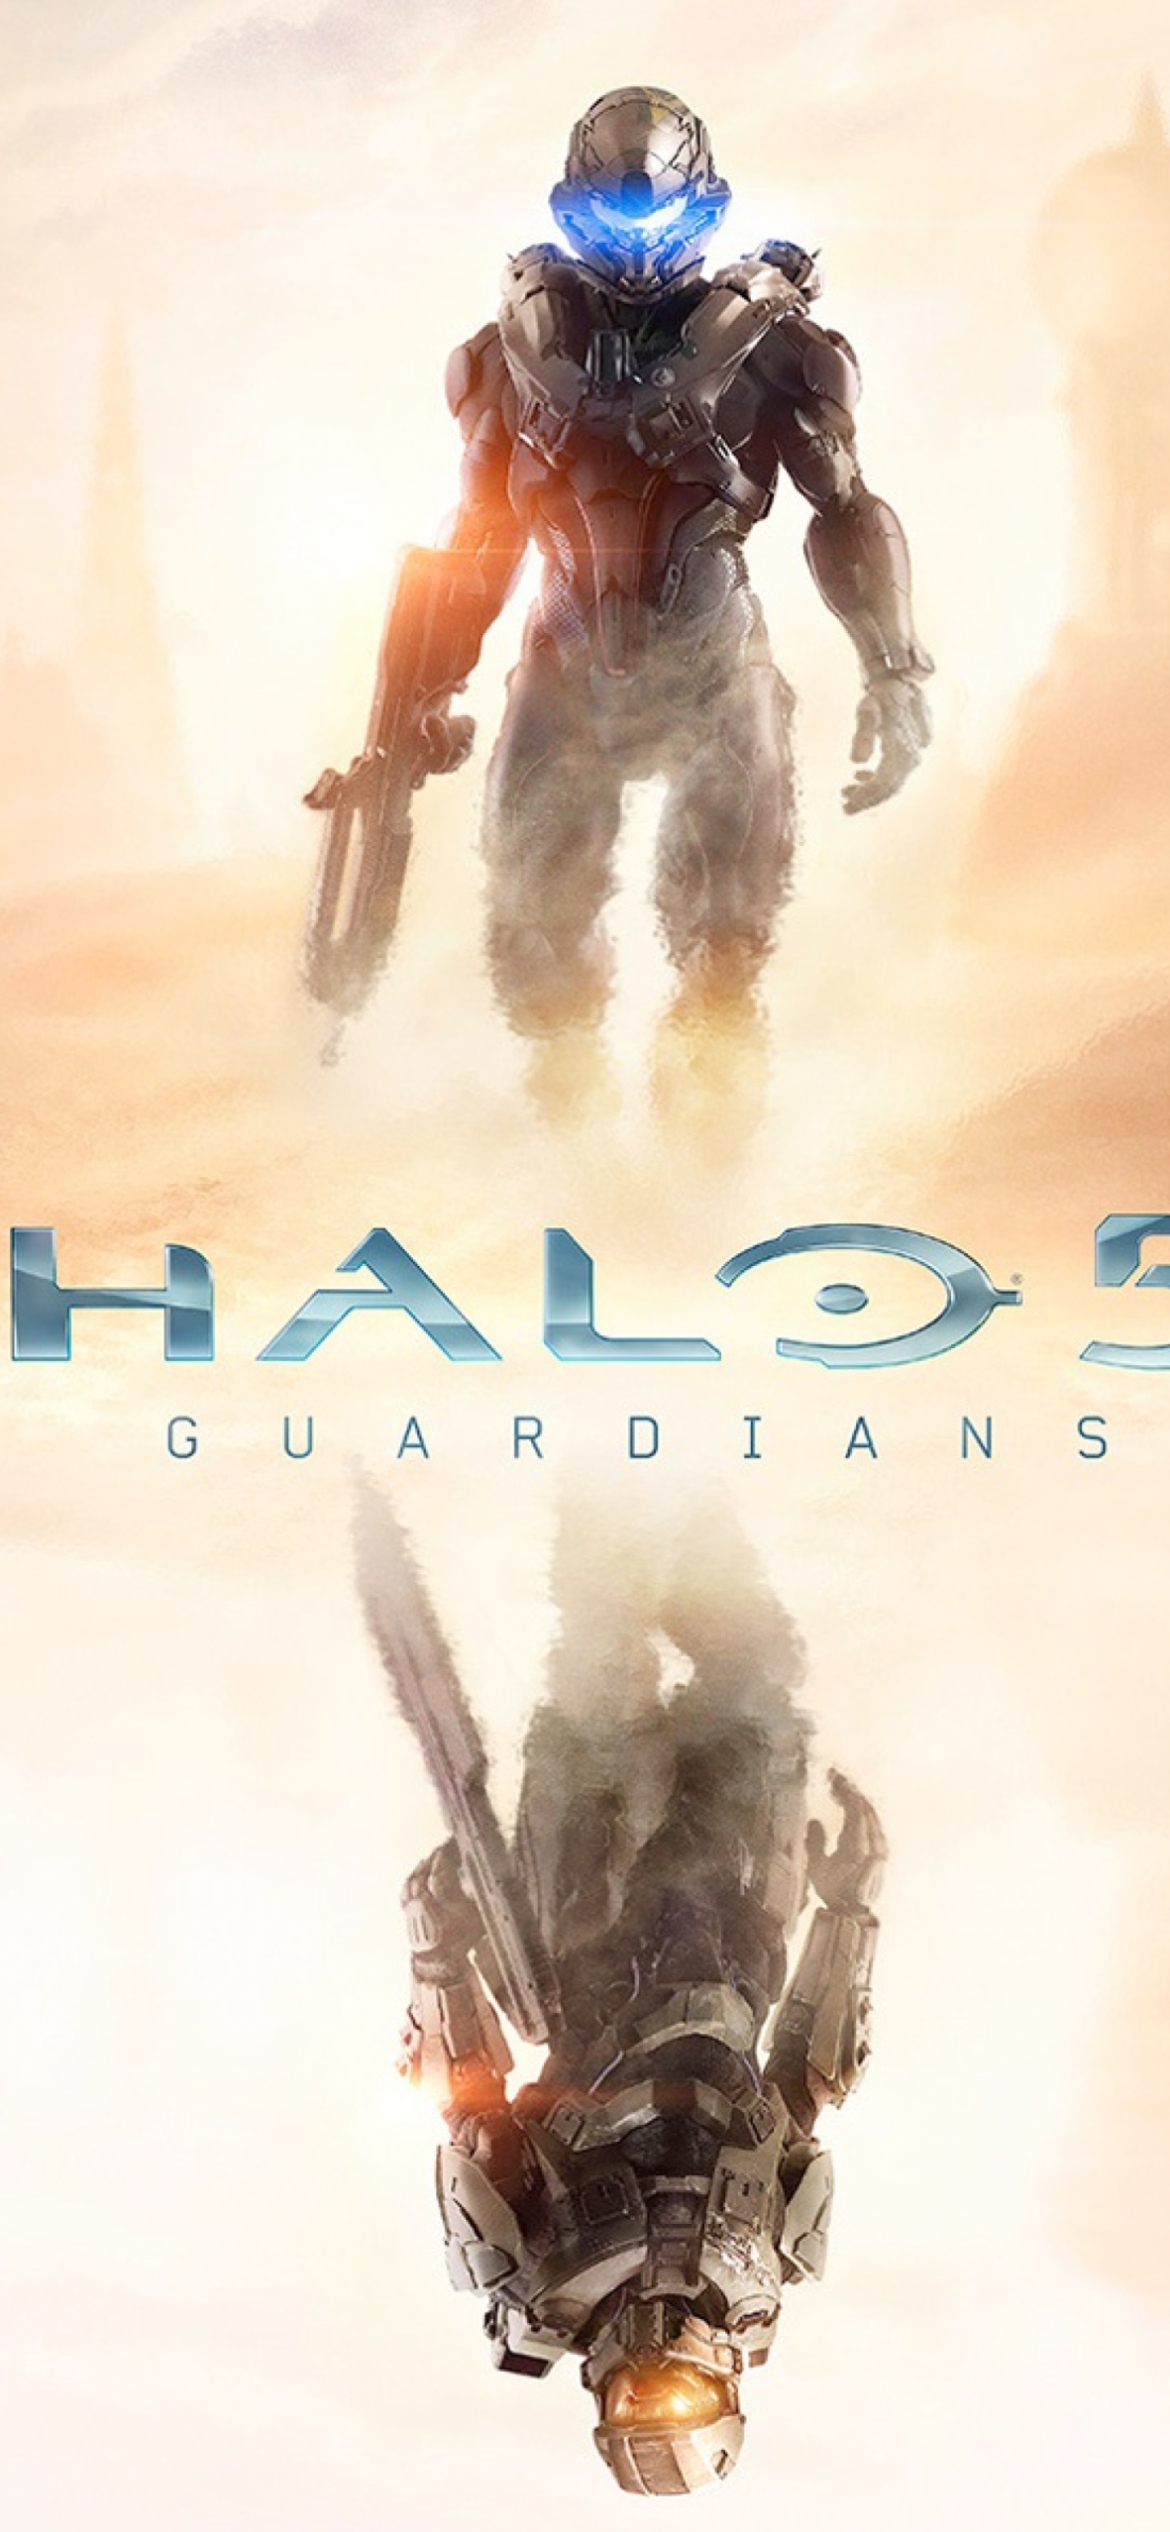 Halo 5 Guardians 2015 Game wallpaper 1170x2532